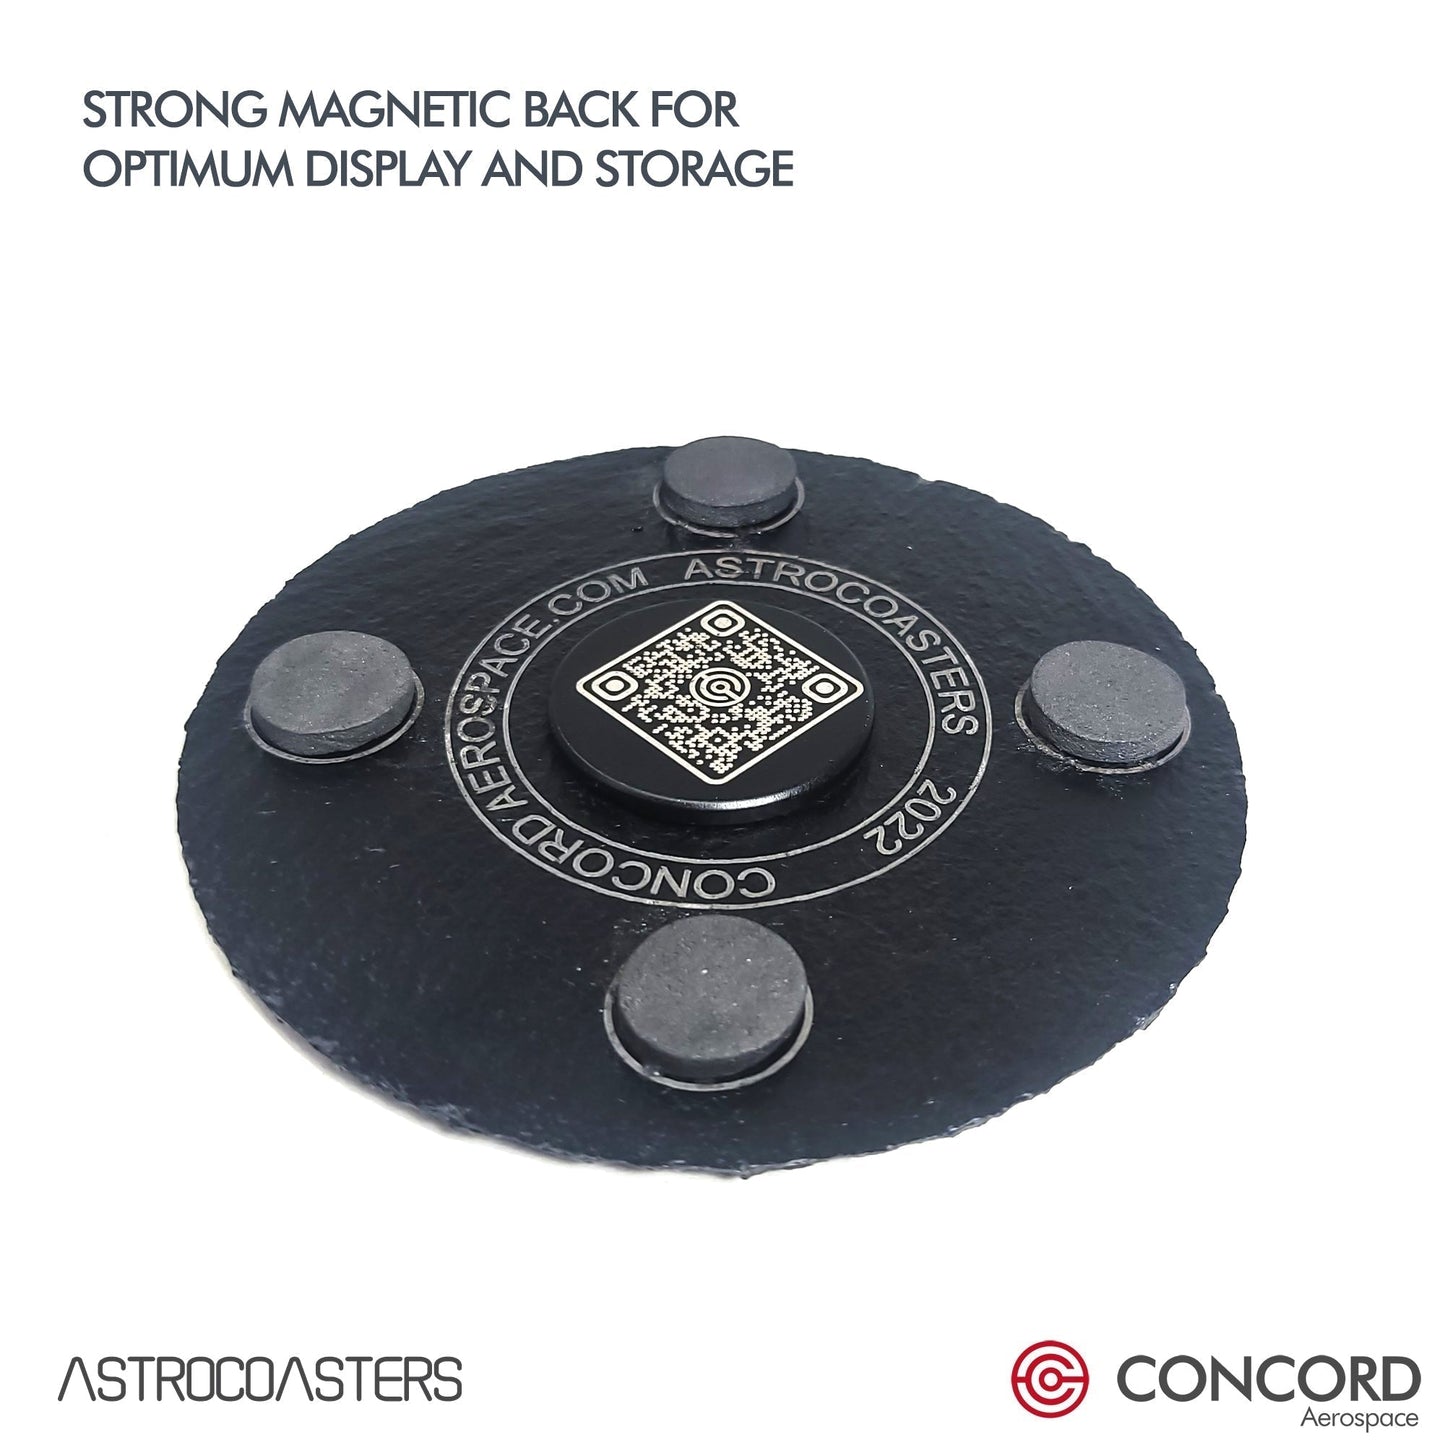 STS - 5 SPACE SHUTTLE - SLATE COASTER - Concord Aerospace Concord Aerospace Concord Aerospace Coasters